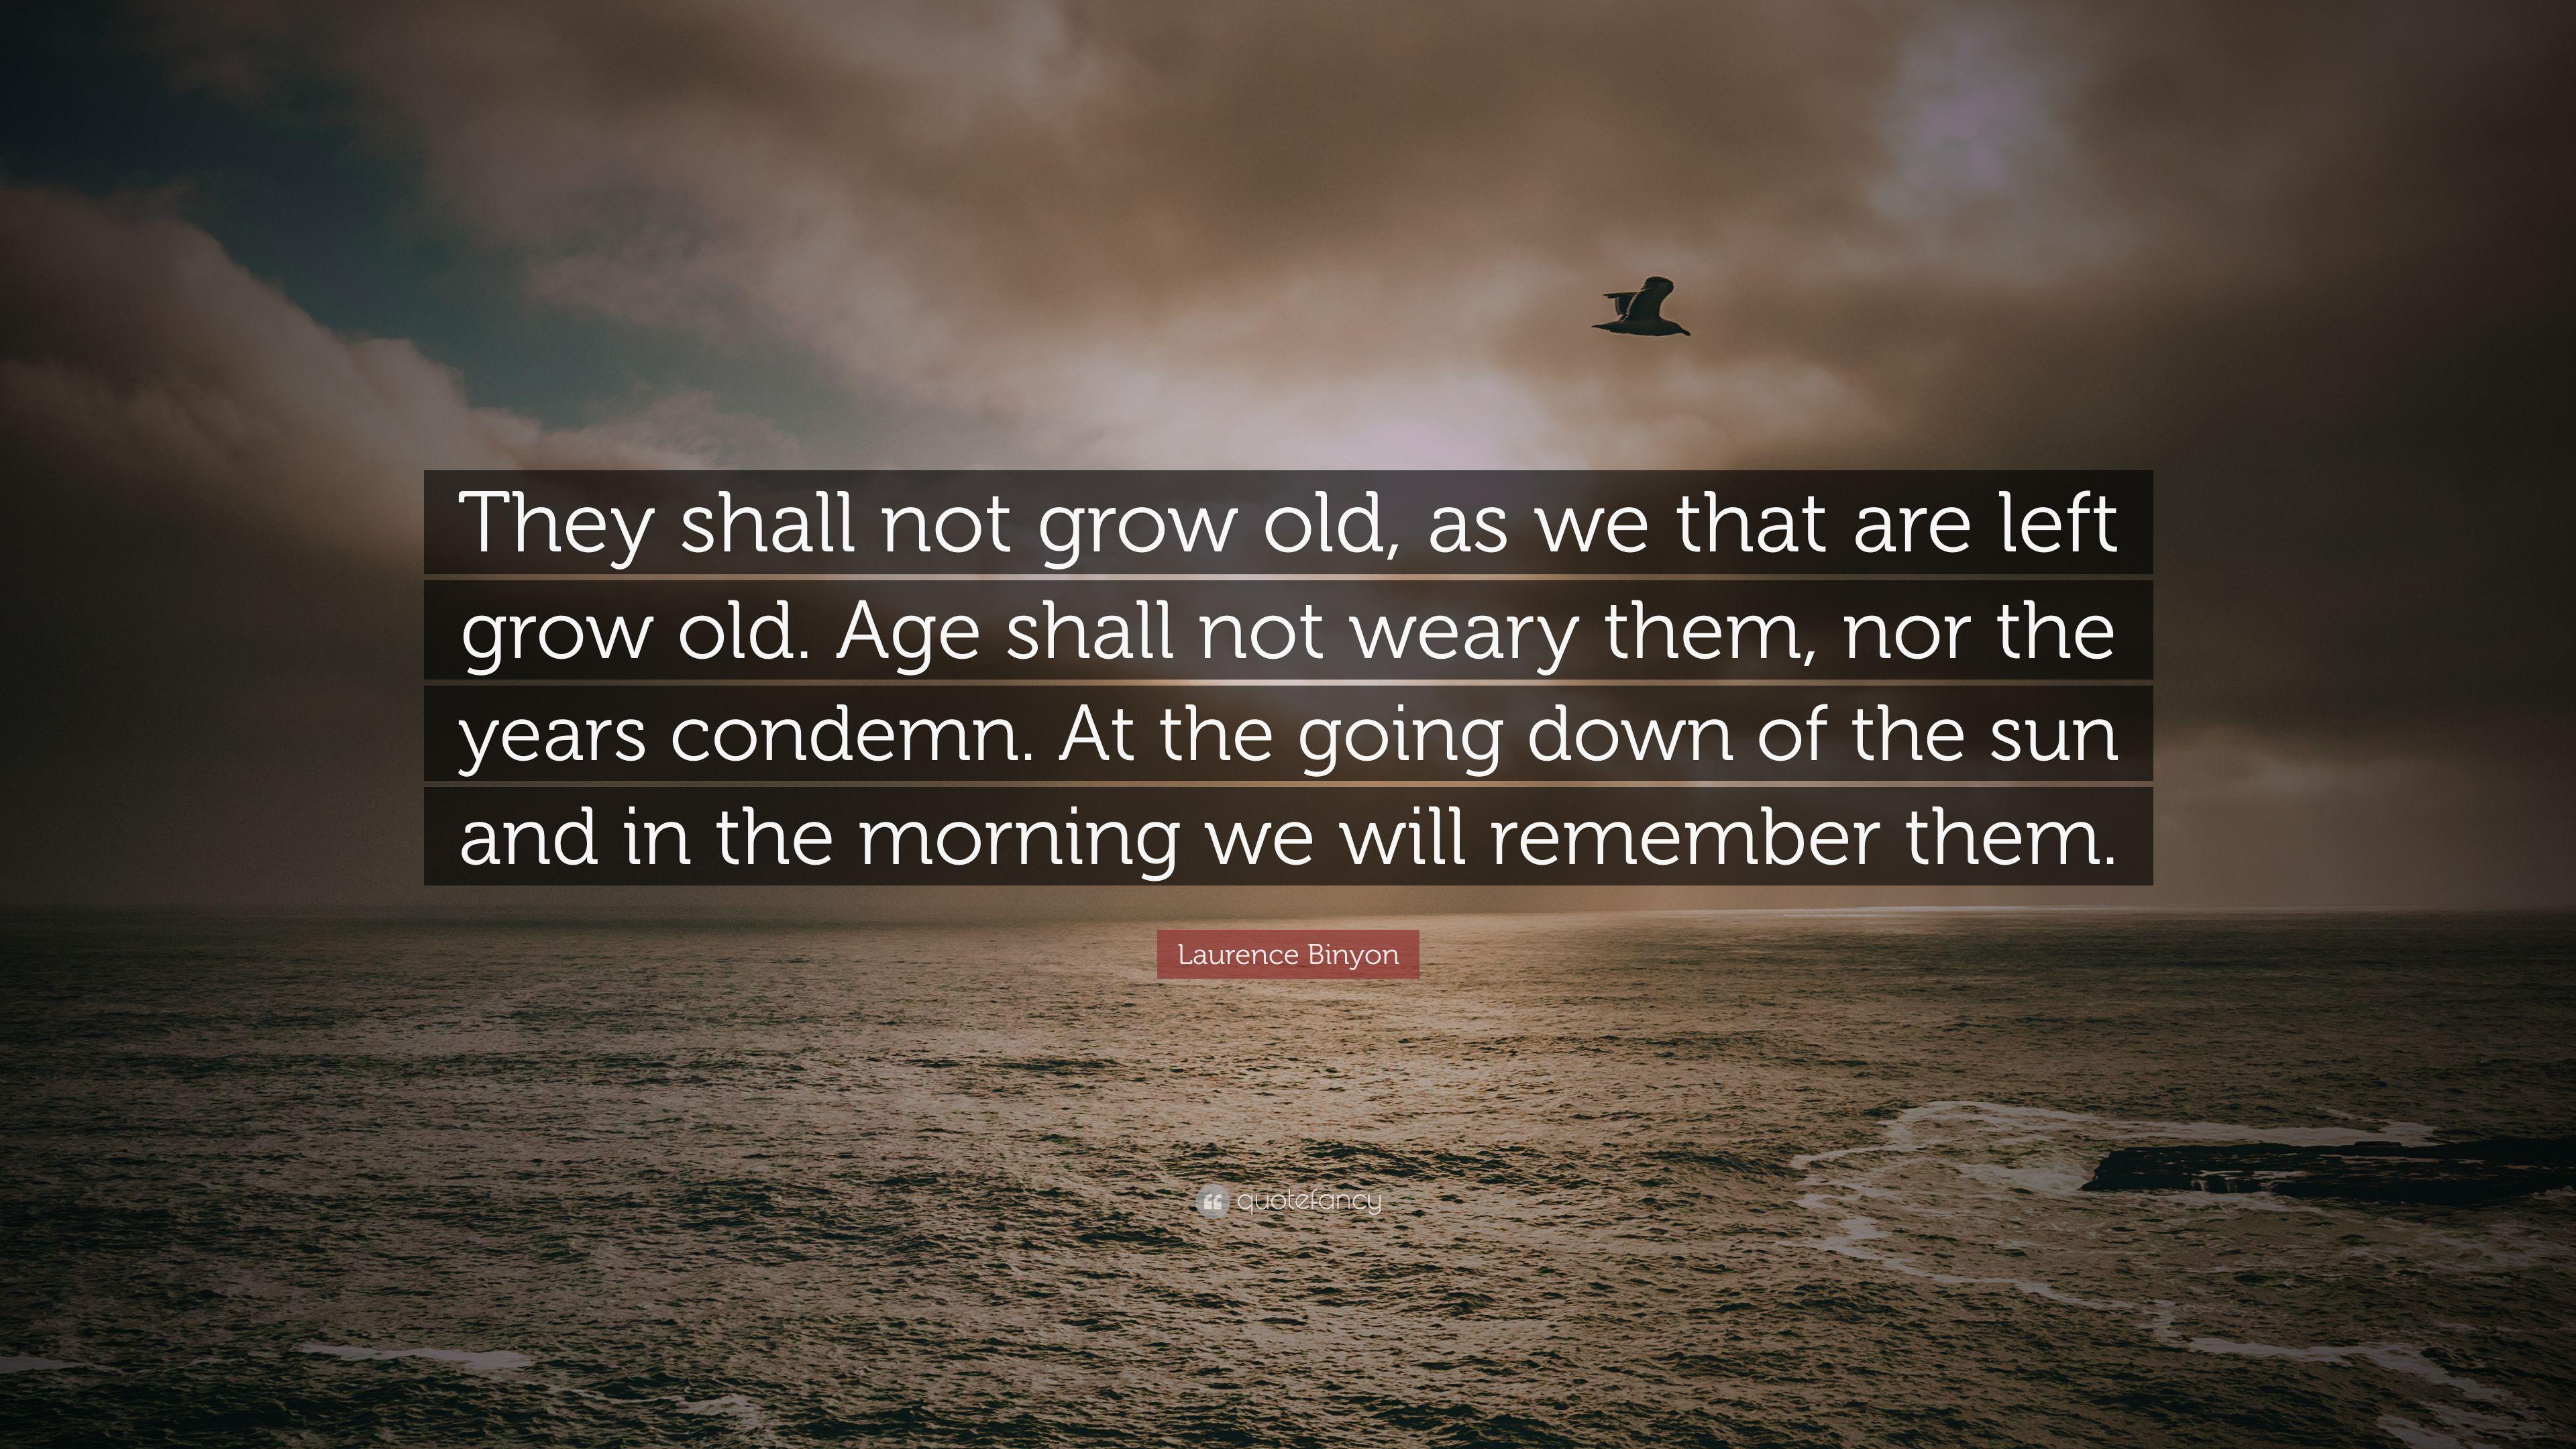 Laurence Binyon Quote: "They shall not grow old, as we that are left.